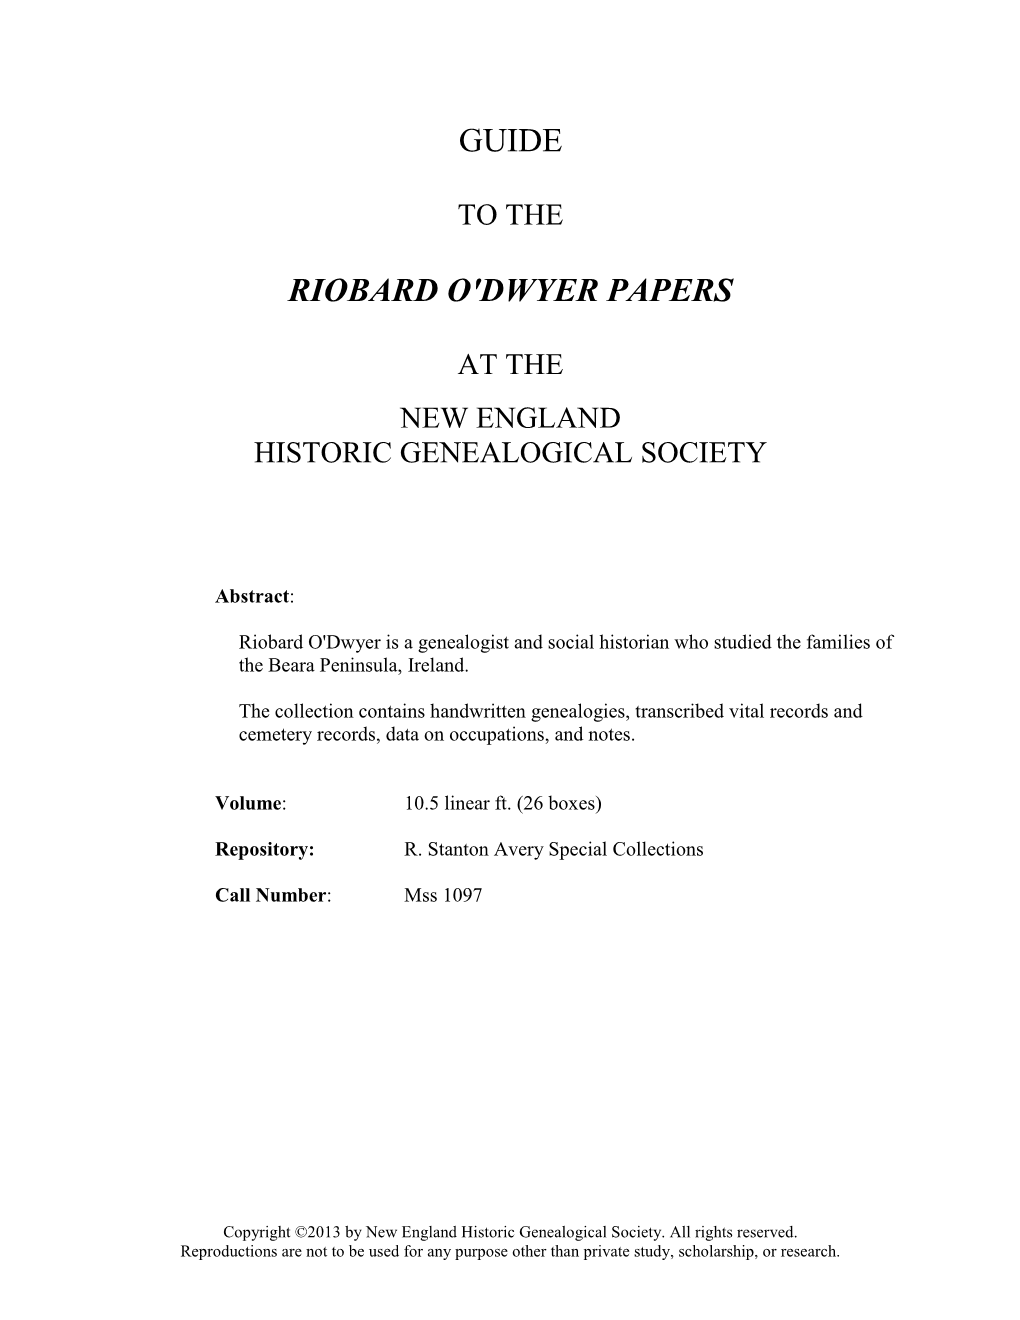 Guide to the Riobard O'dwyer Papers